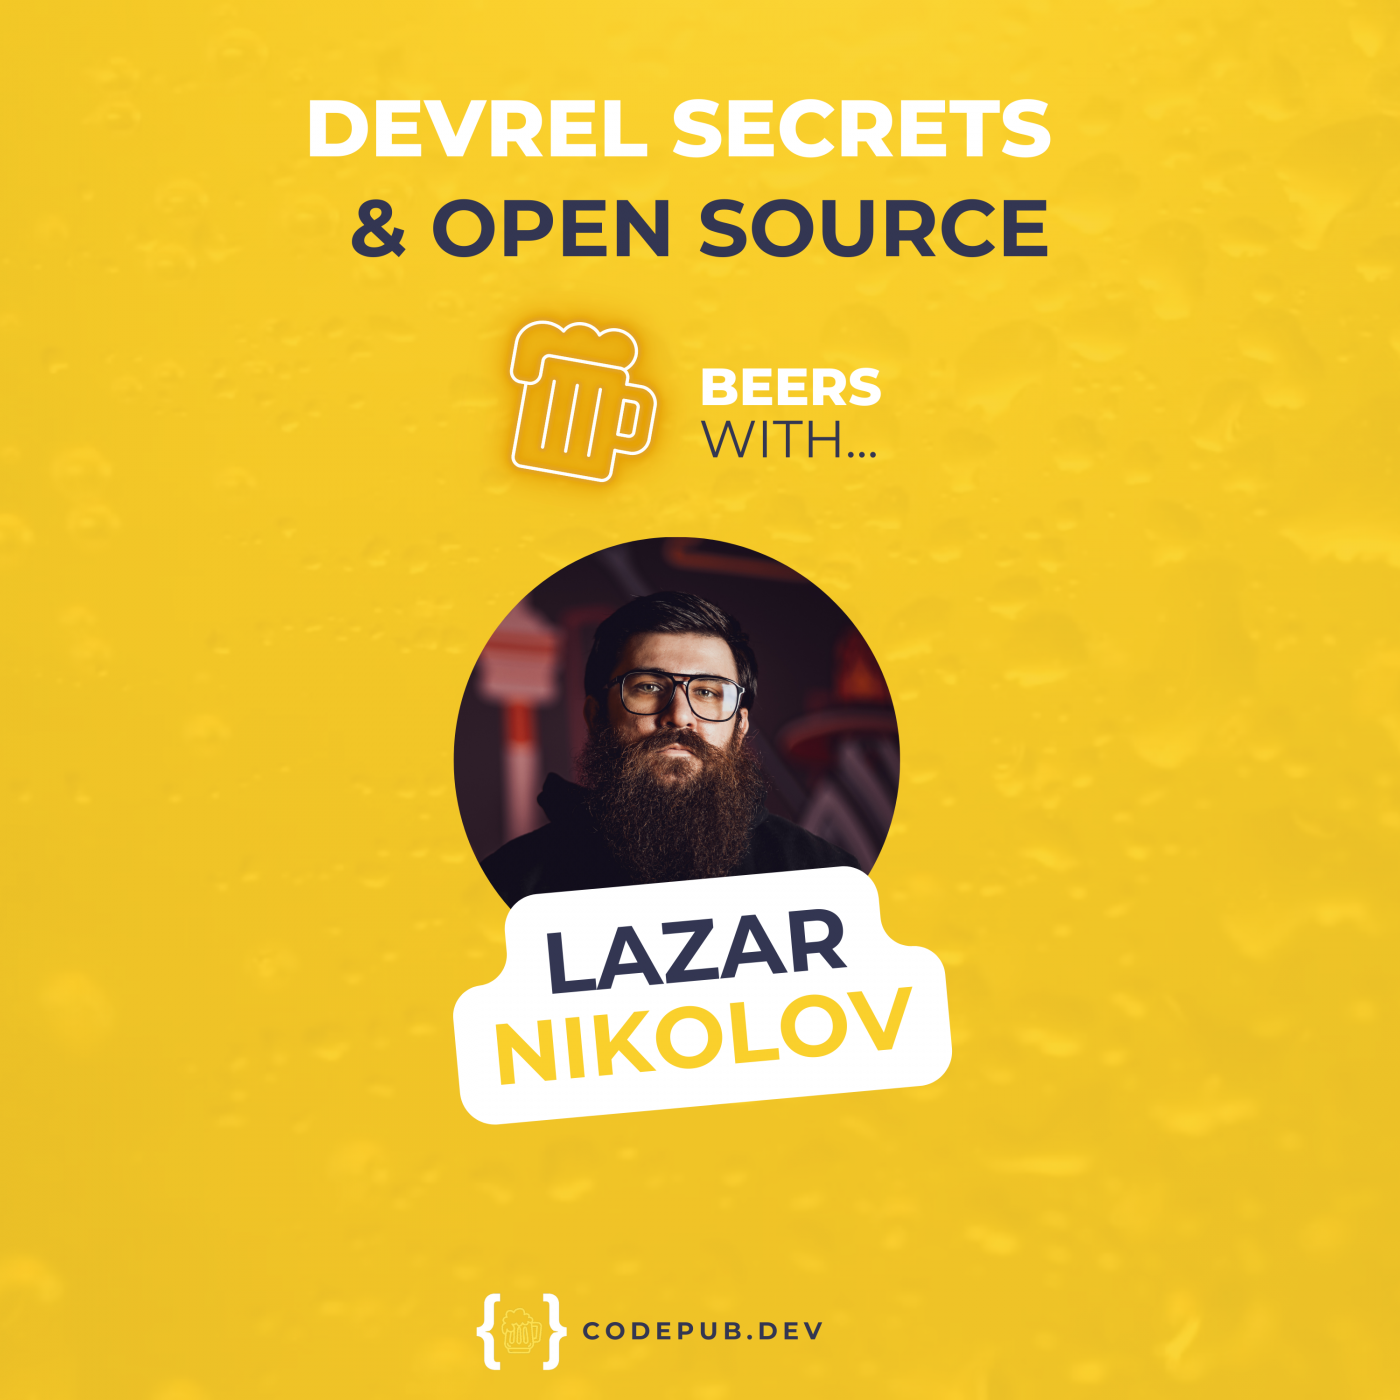 Beers with Lazar Nikolov: Navigating the World of DevRel and Open Source